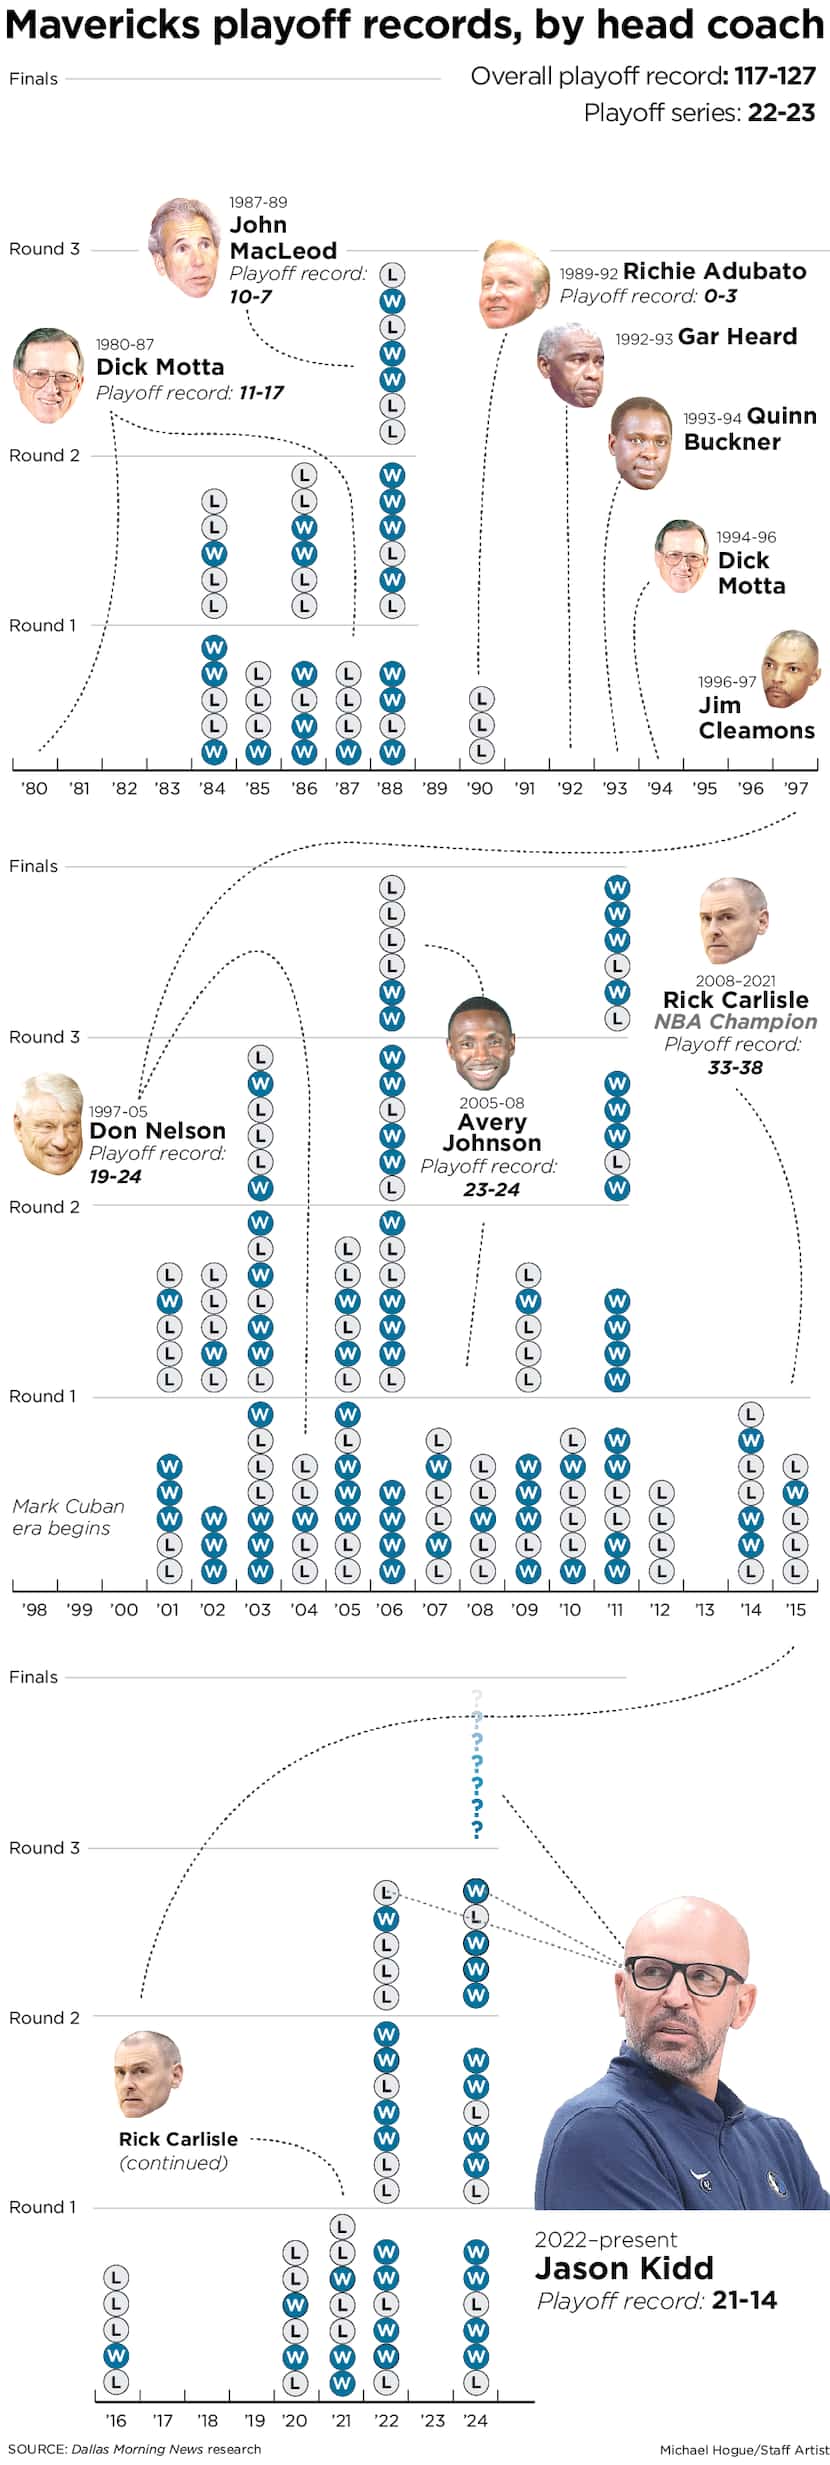 A look at the Dallas Mavericks' playoff records by head coach.